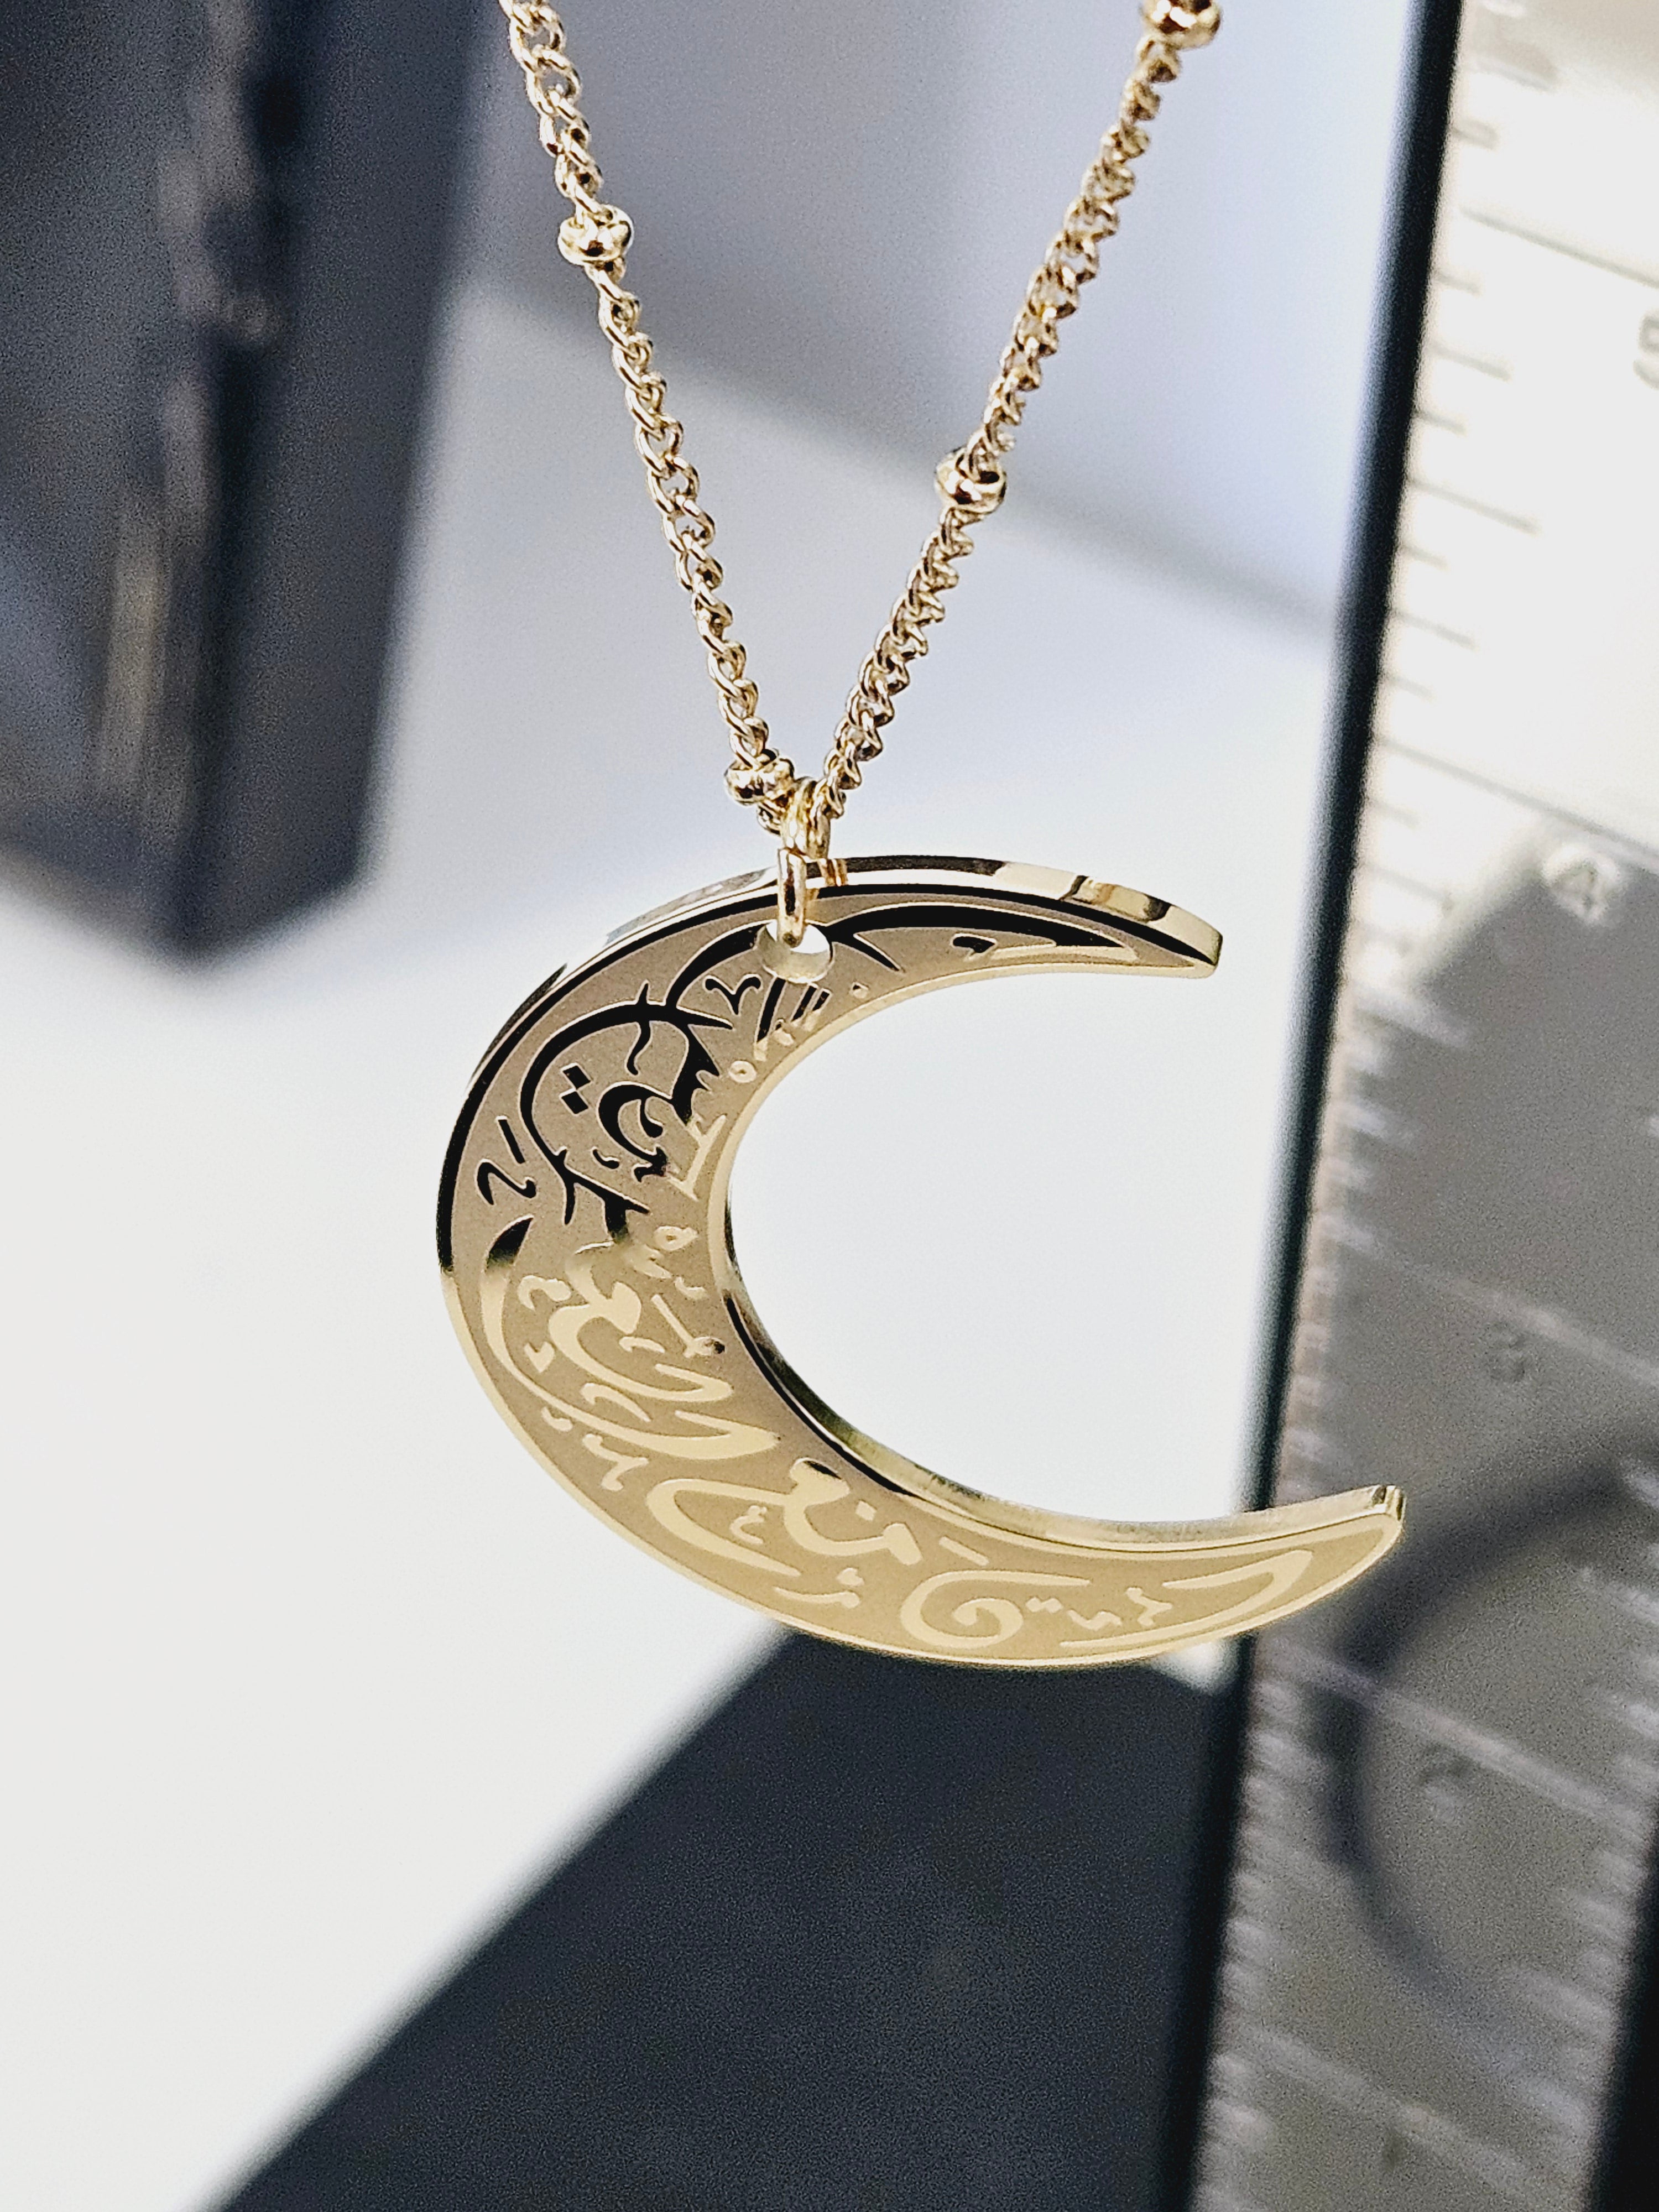 Moon Necklace - “Certainly with difficulty comes ease”. - Habibi Heritage